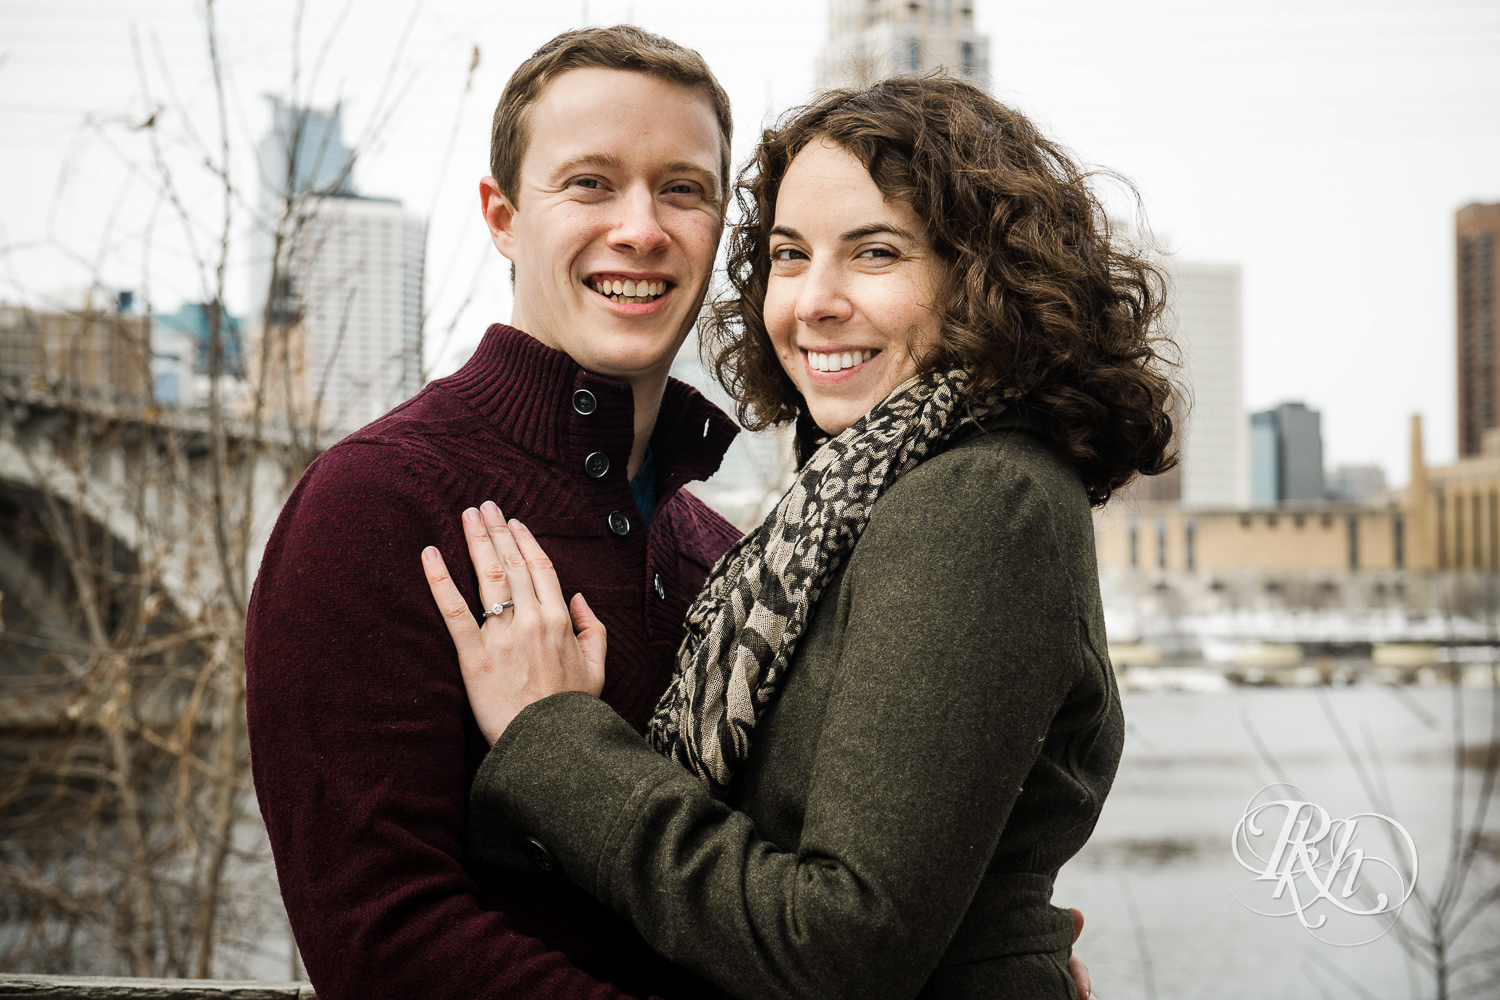 Man and woman smile during winter St. Anthony Main engagement photos in Minneapolis, Minnesota.